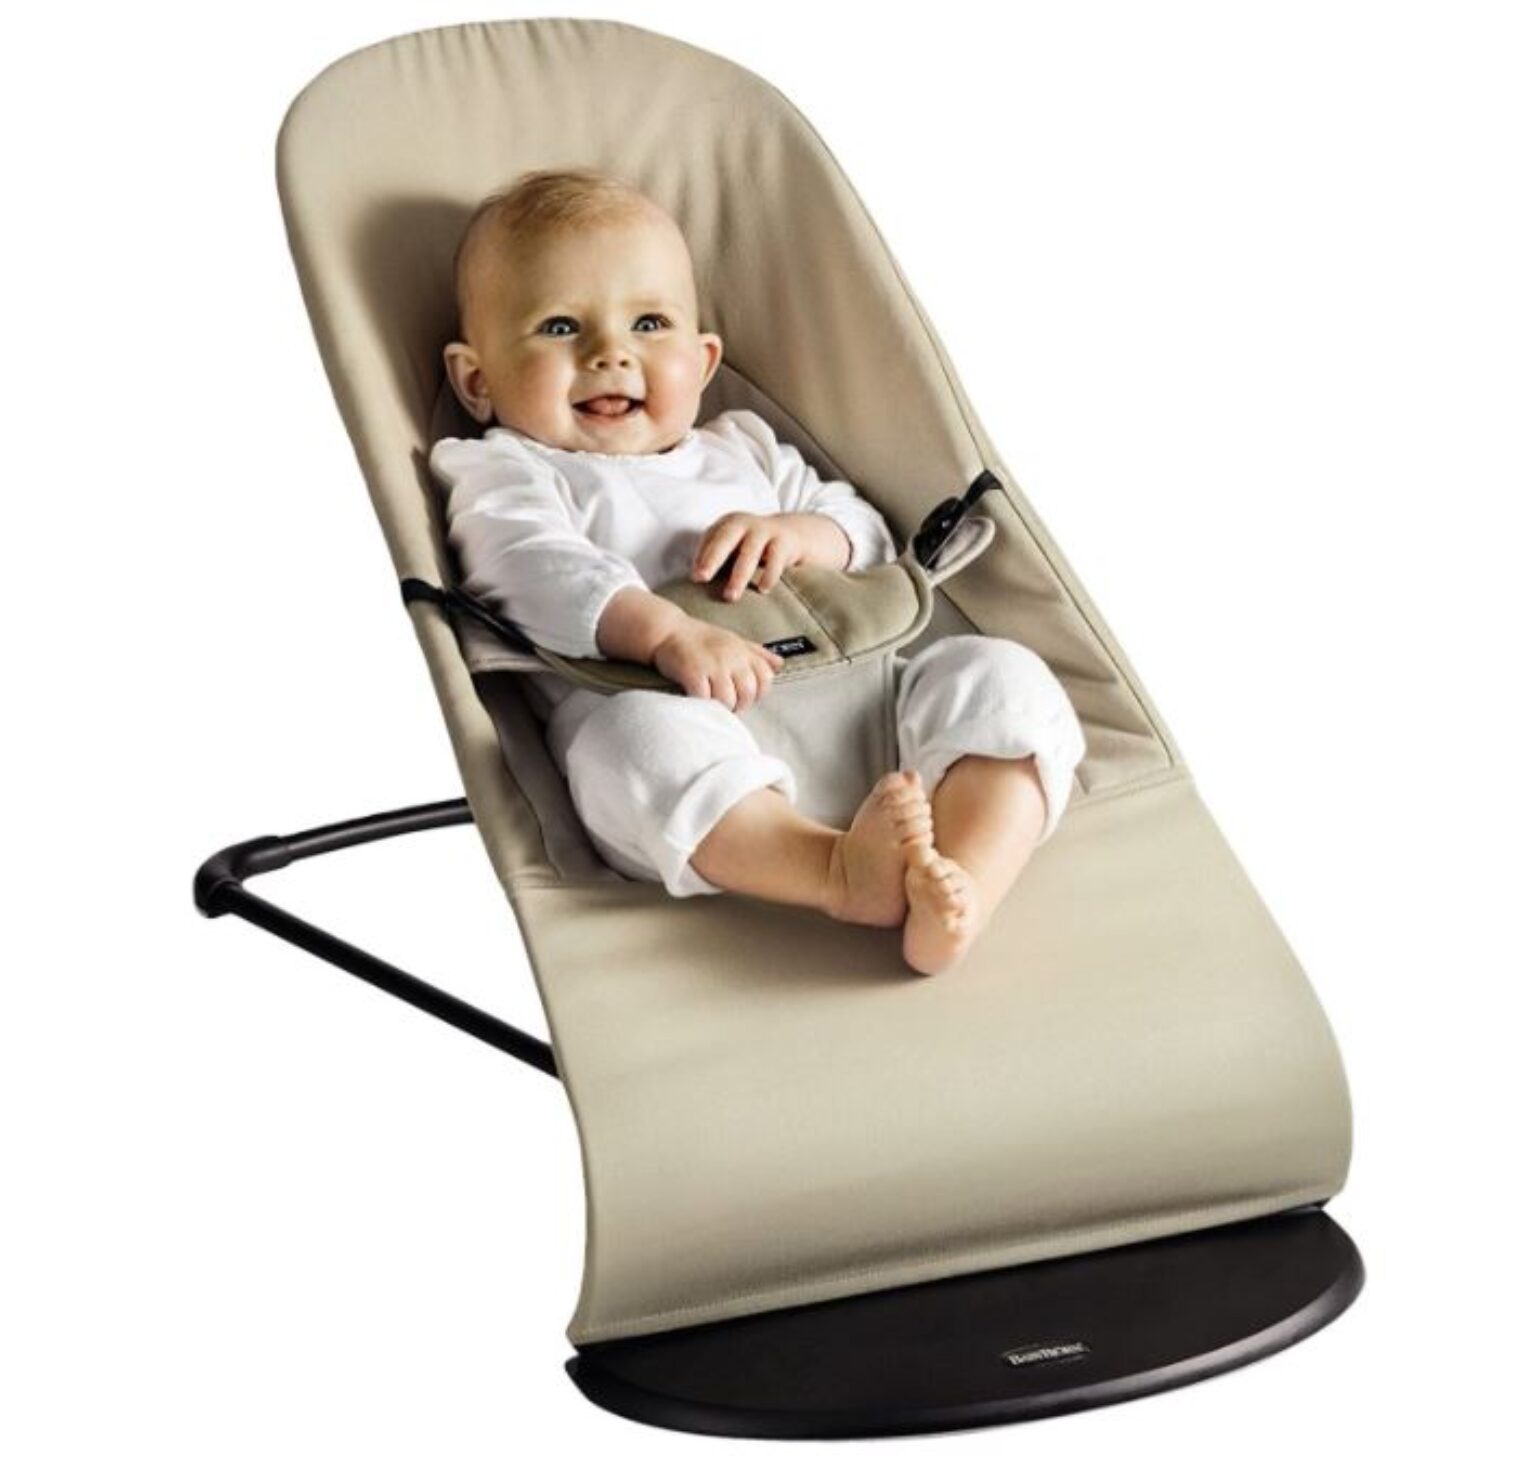 Best Baby Bouncer Seat to Buy in 2021 | Infant Stuff Reviews